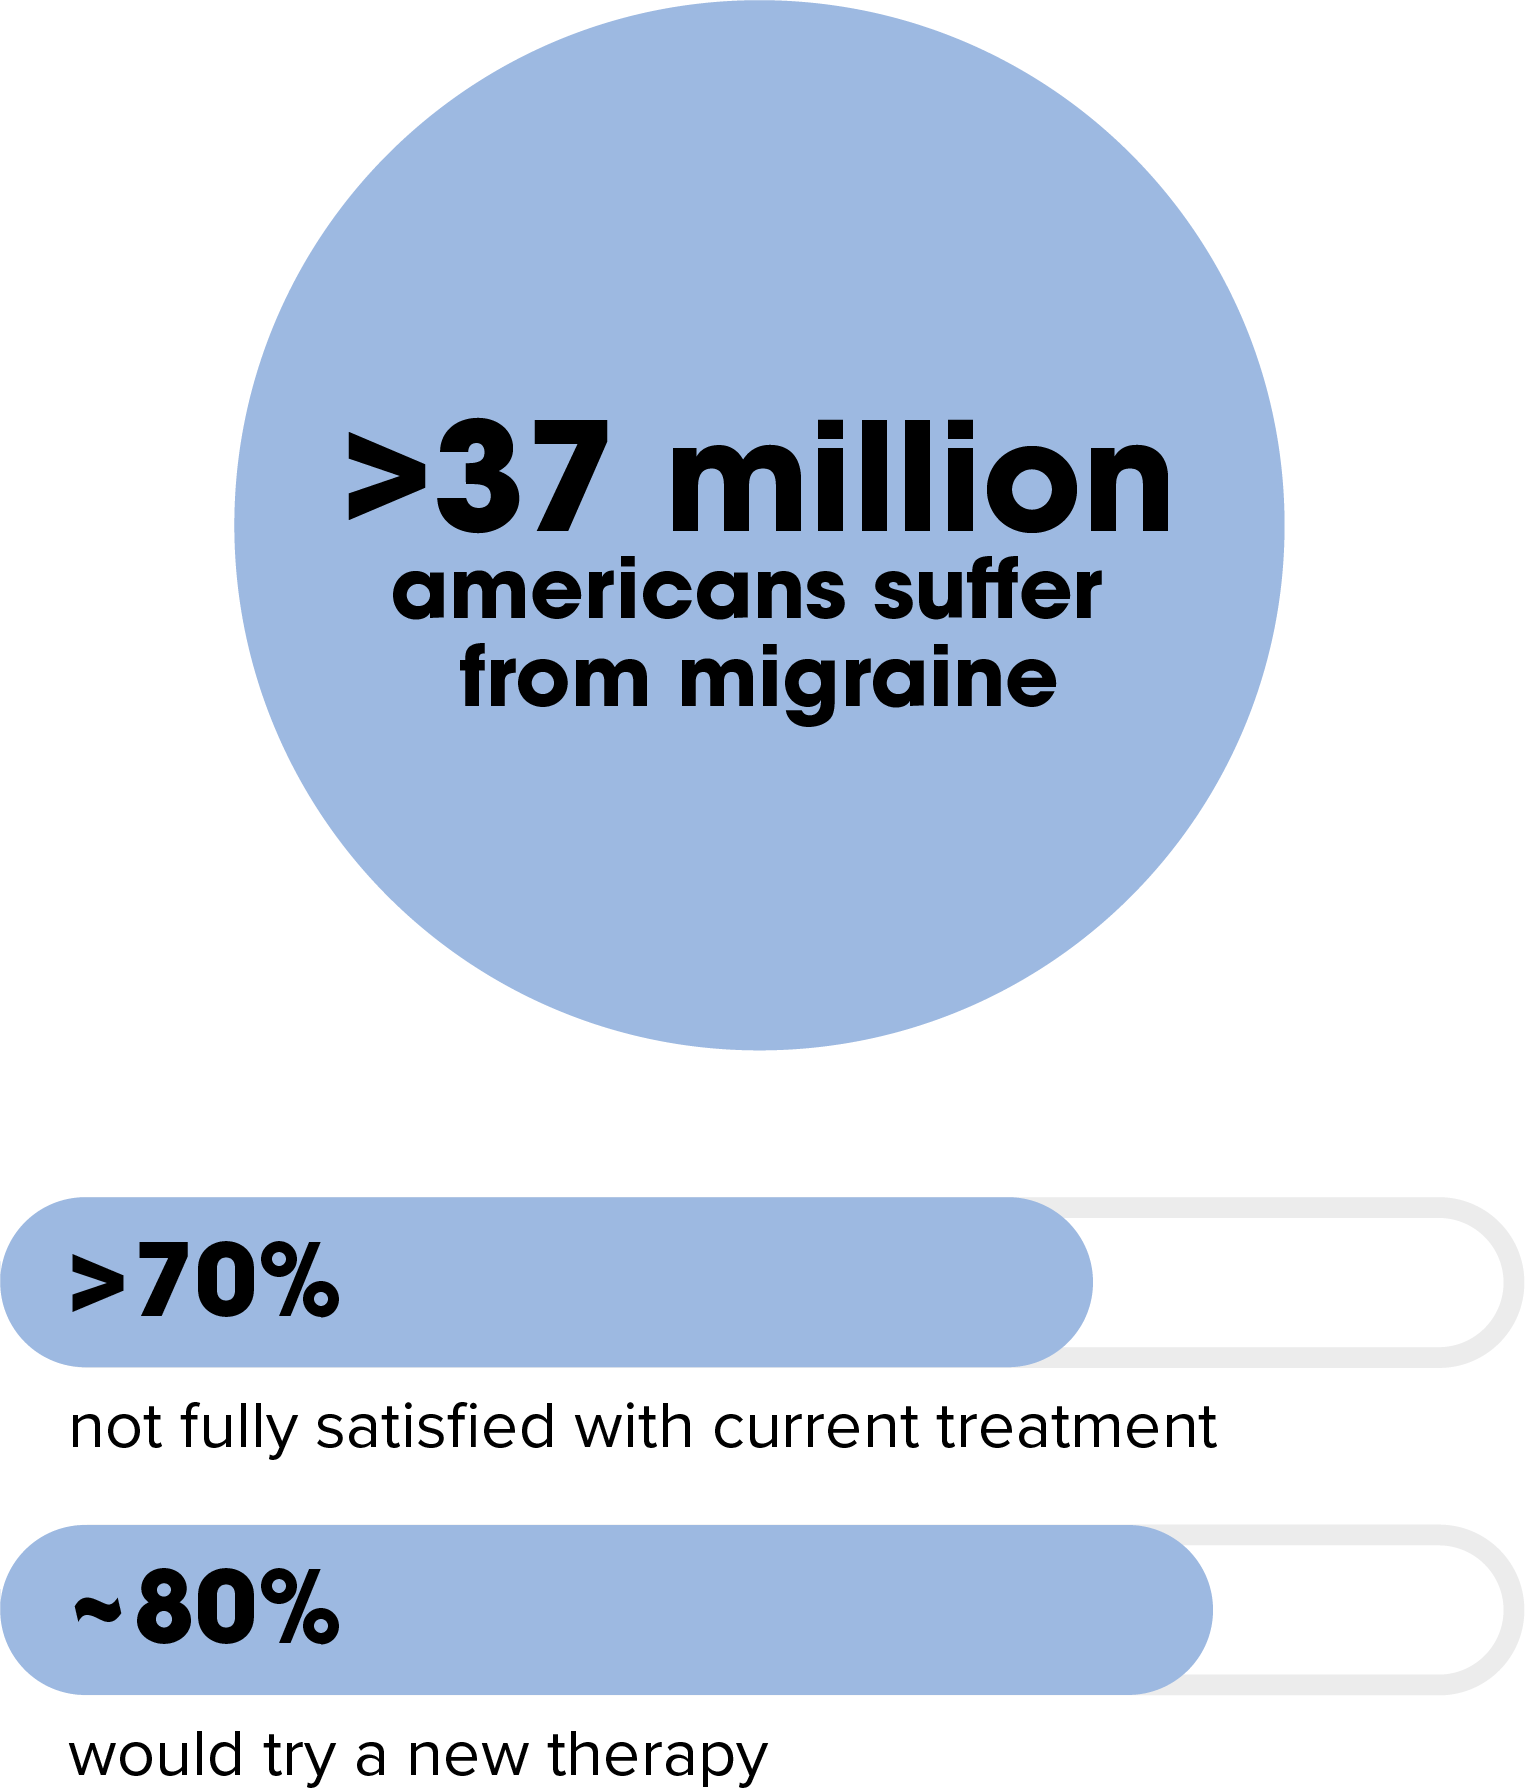 More than 37 million Americans suffer from migraines, over 70% are not fully satisfied with current treatment, around 80% would try a new therapy